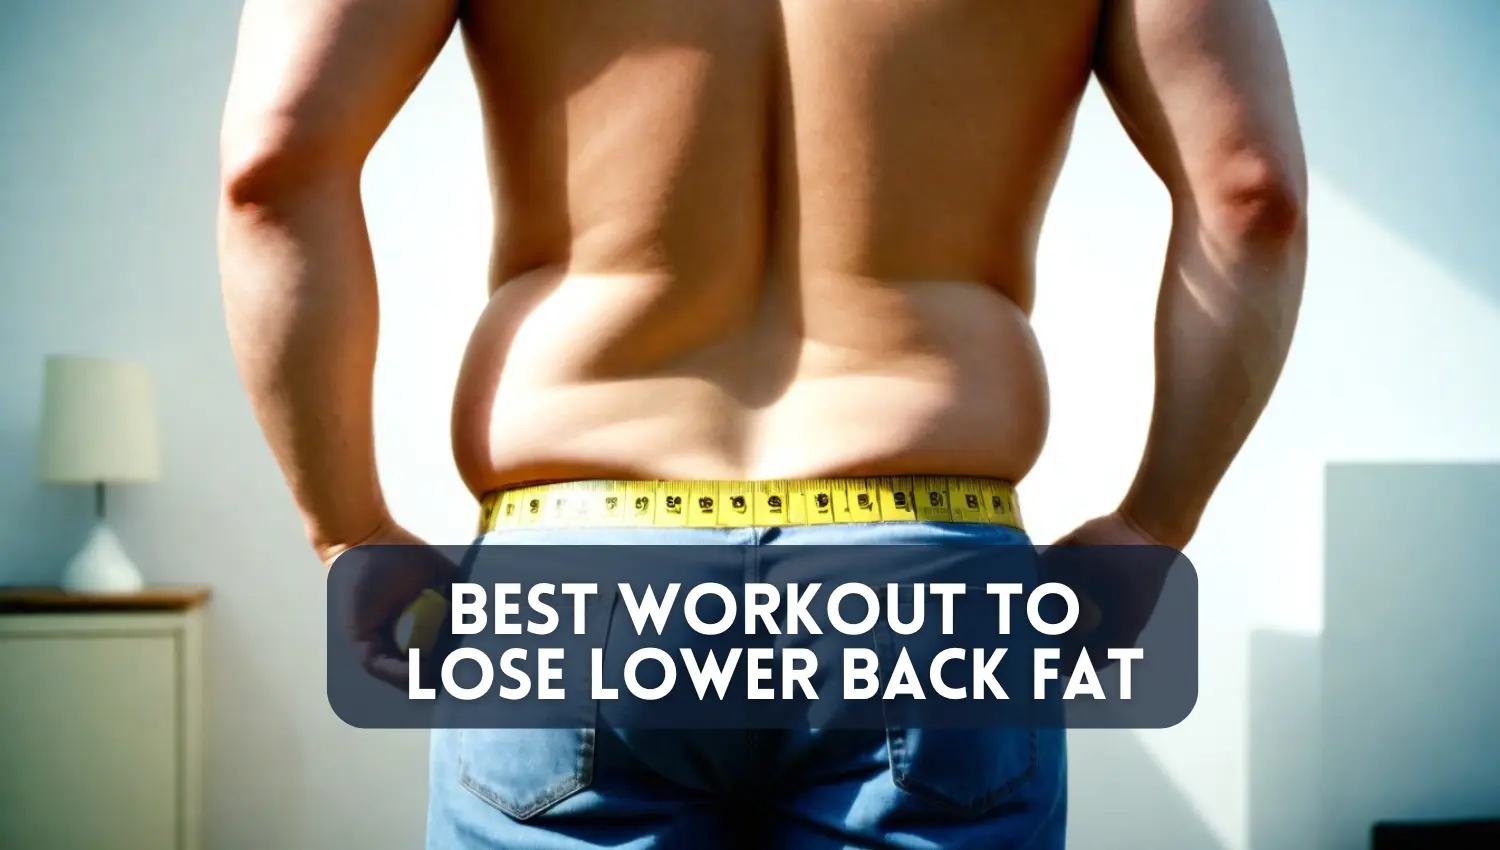 You are currently viewing Transform Your Lower Back : Best Workout to Lose Lower Back Fat